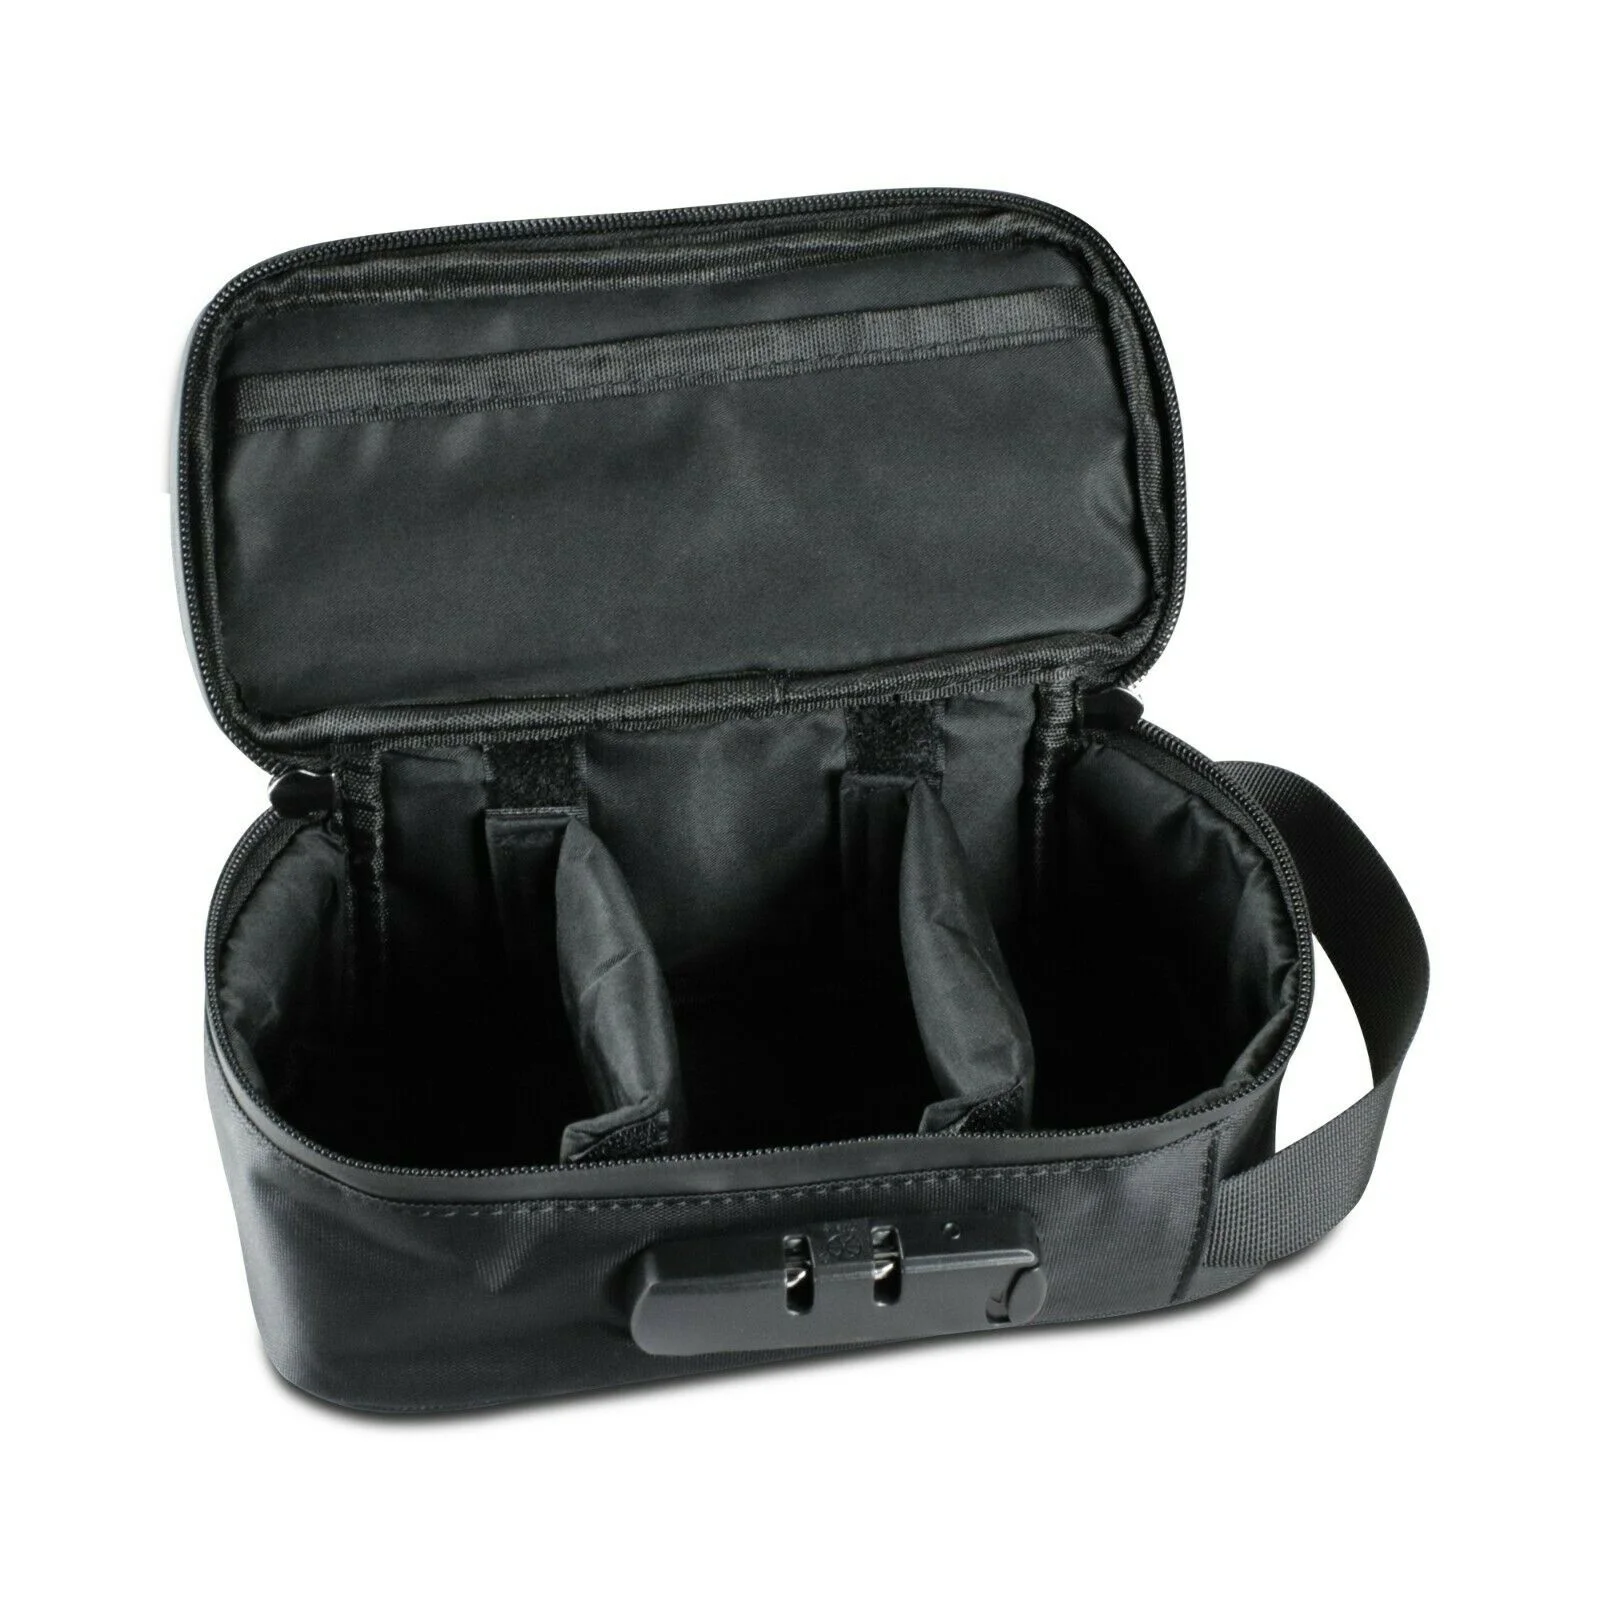 Smell Proof stash box smell proof leather tobacco bag with lock Travel Storage case